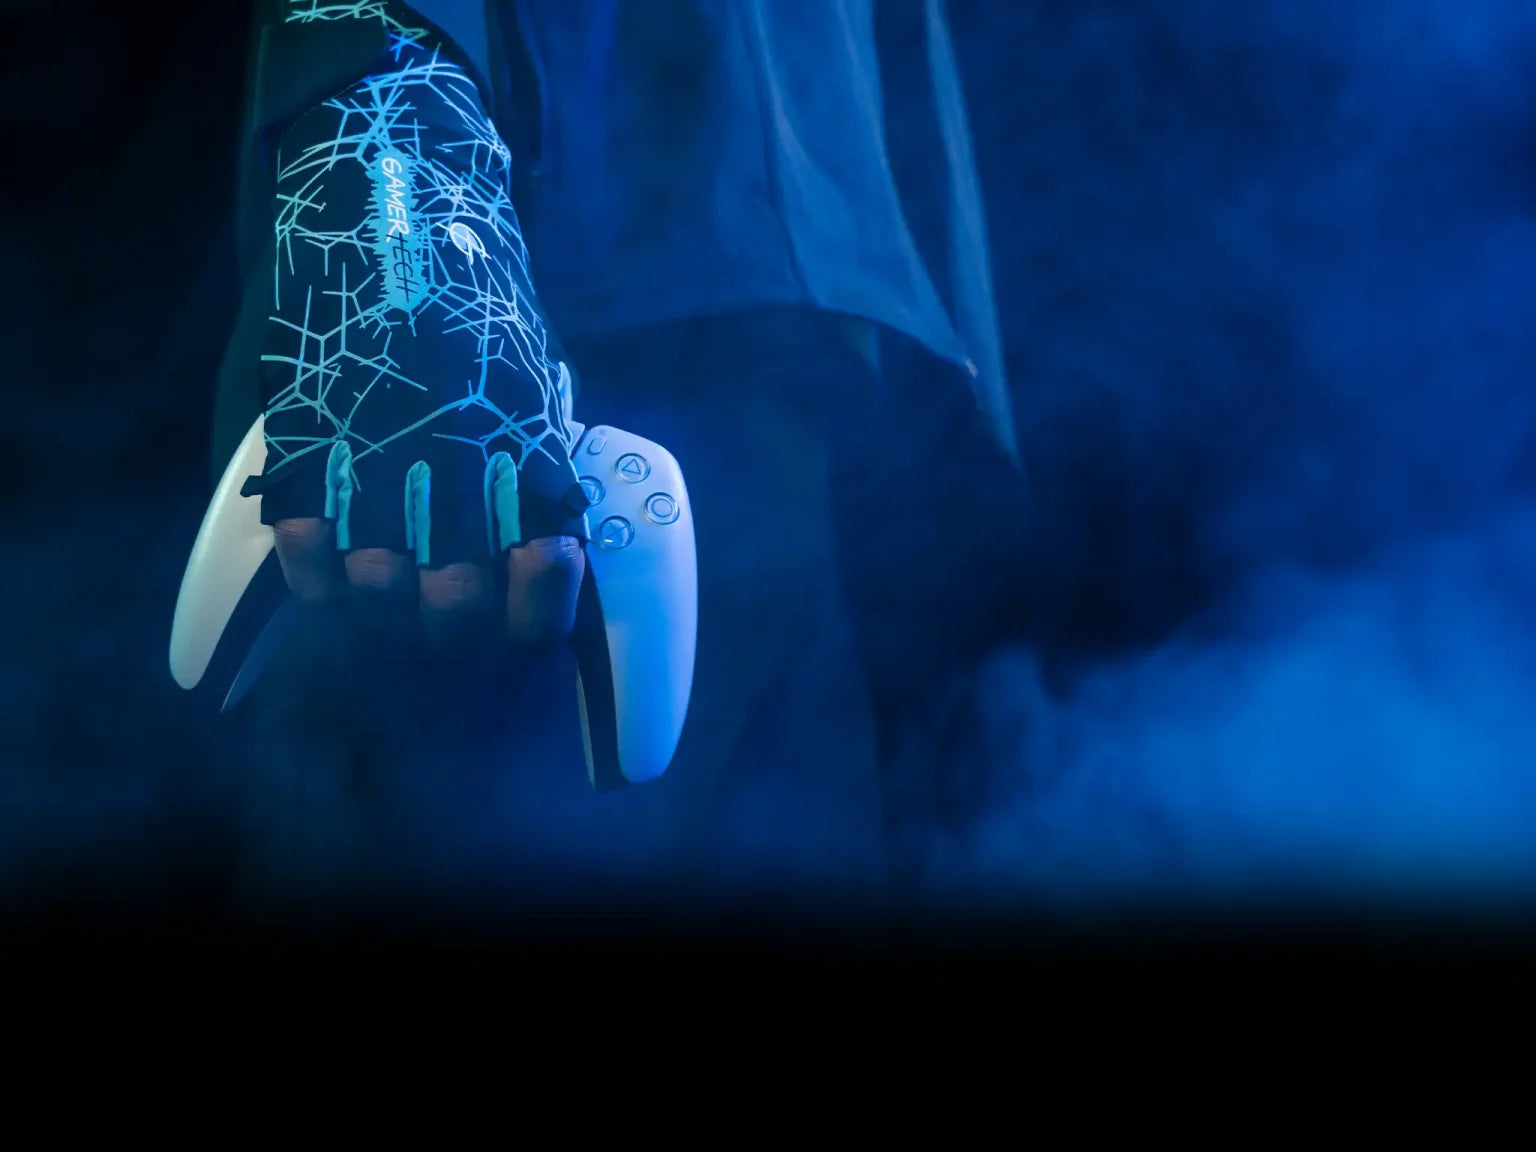 Esports player wearing the sub zero glove holding a gaming controller